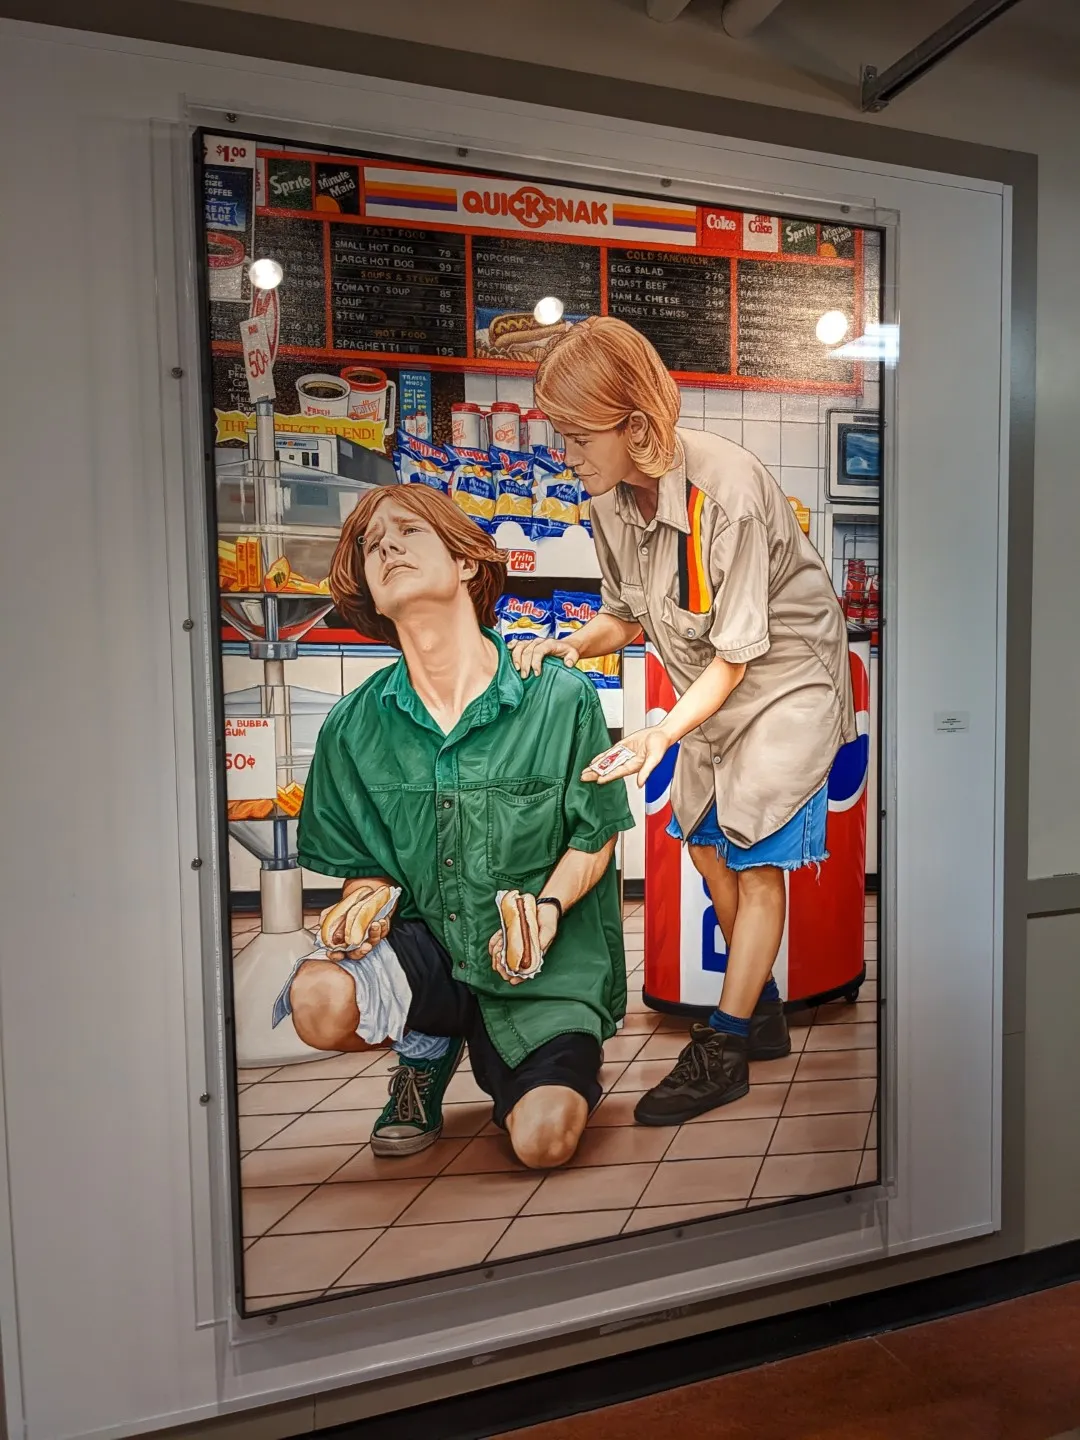 a painting by Chris Woods titled "The Realm of Convenience II". It depicts a blonde man on his knees with hotdogs in his hands being consoled by another blonde woman with ketchup in her hand. They&#x27;re located in a convenience store.